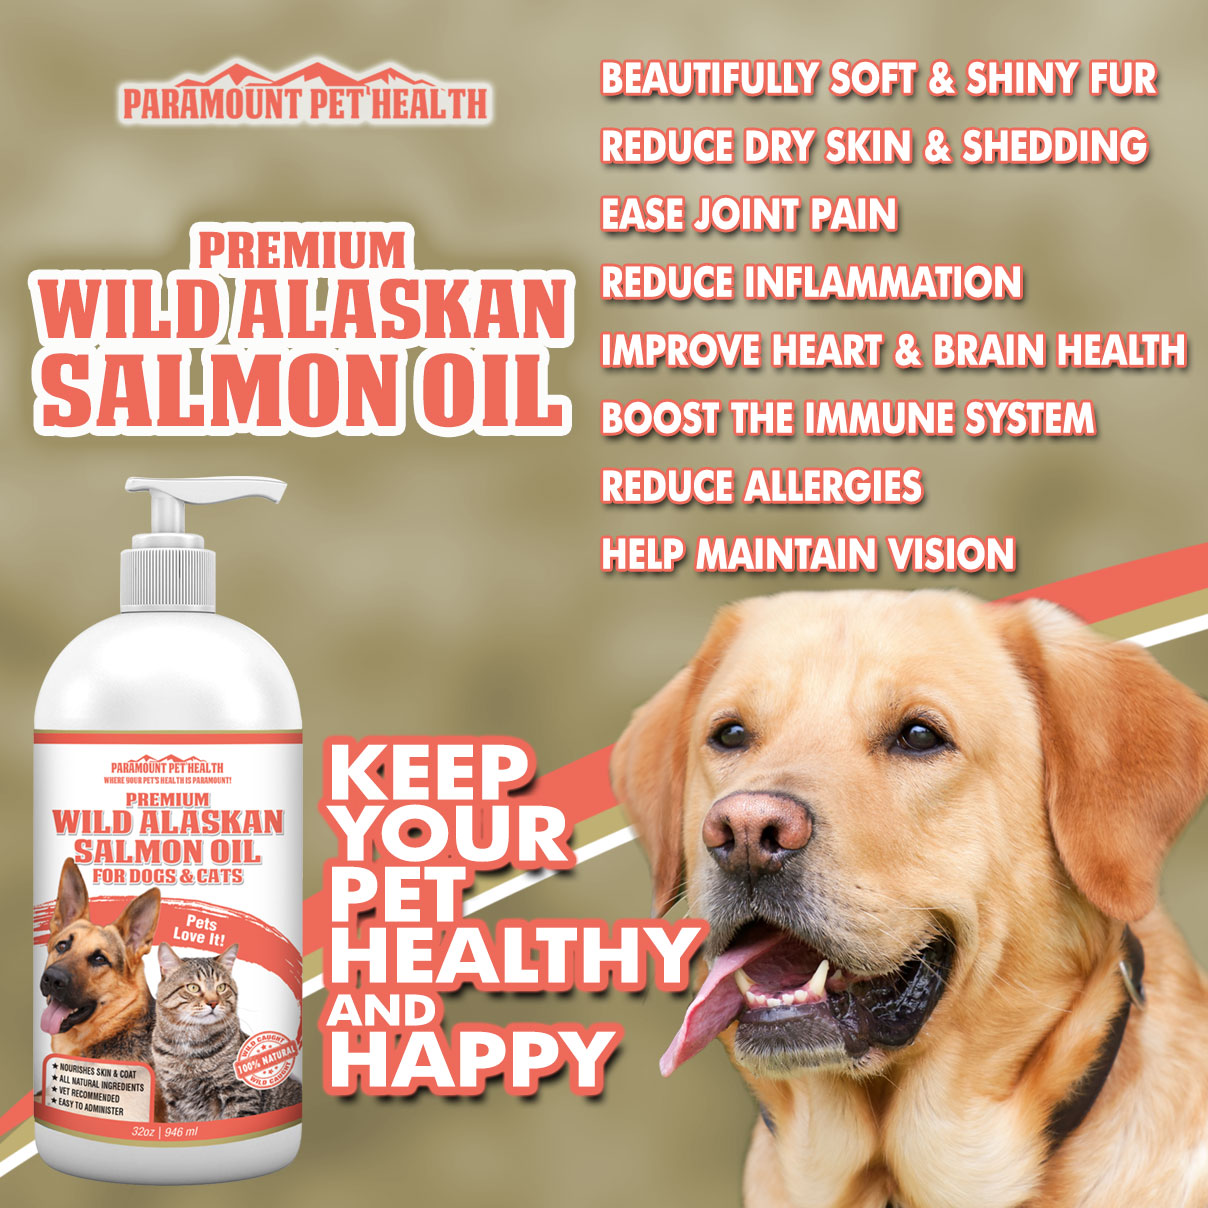 Wild Alaskan Salmon Oil for Dogs and Cats Benefits